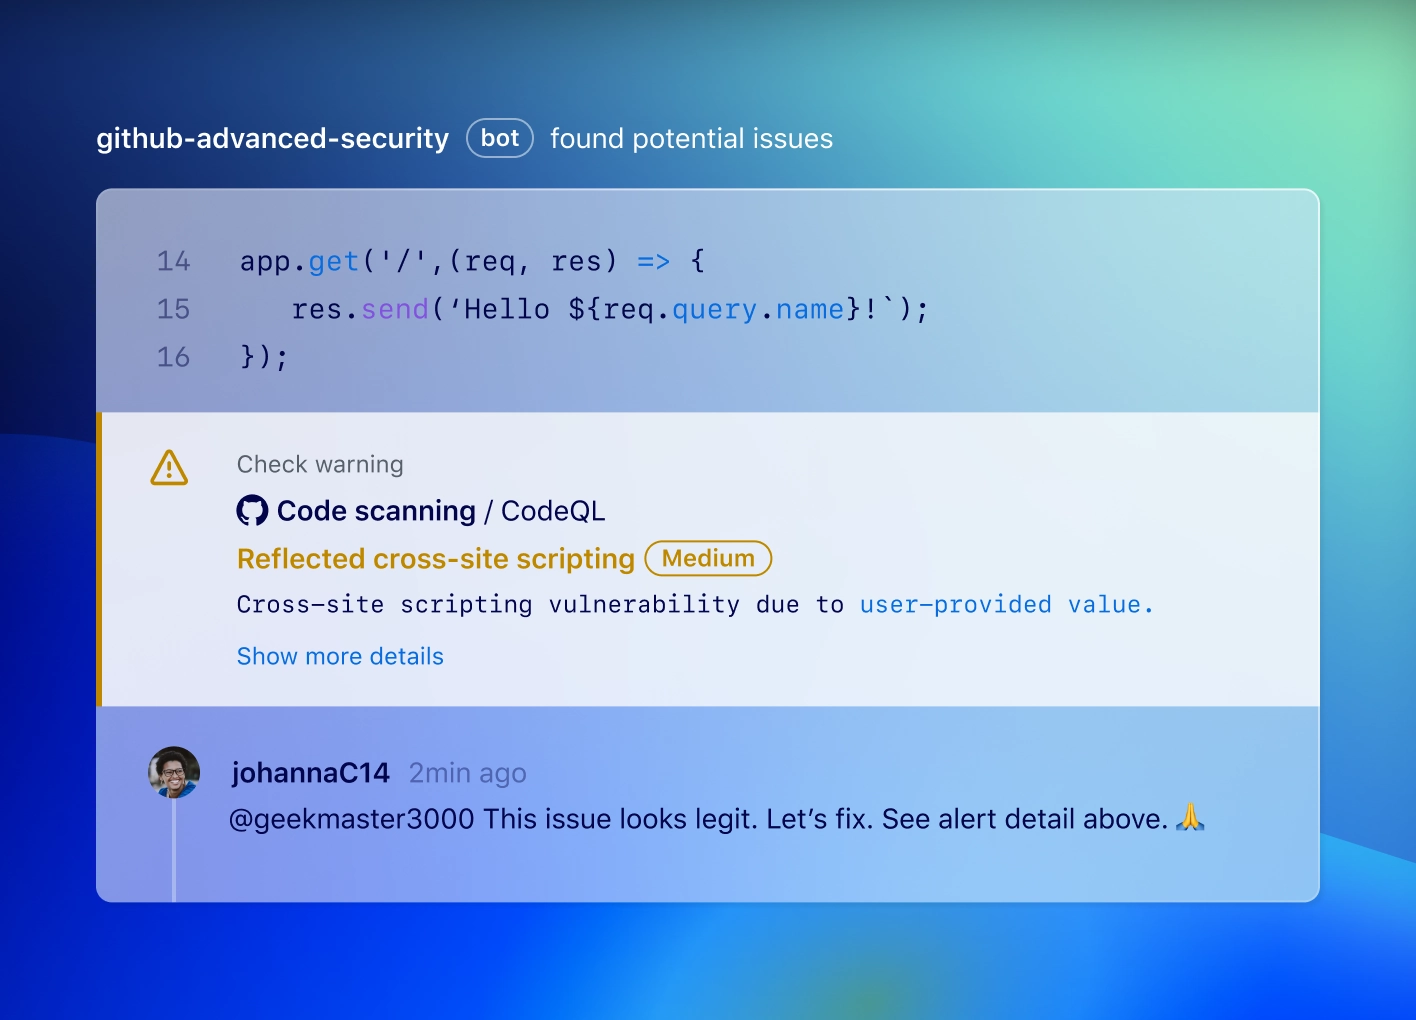 CodeQL warns of a reflected cross-site scripting vulnerability